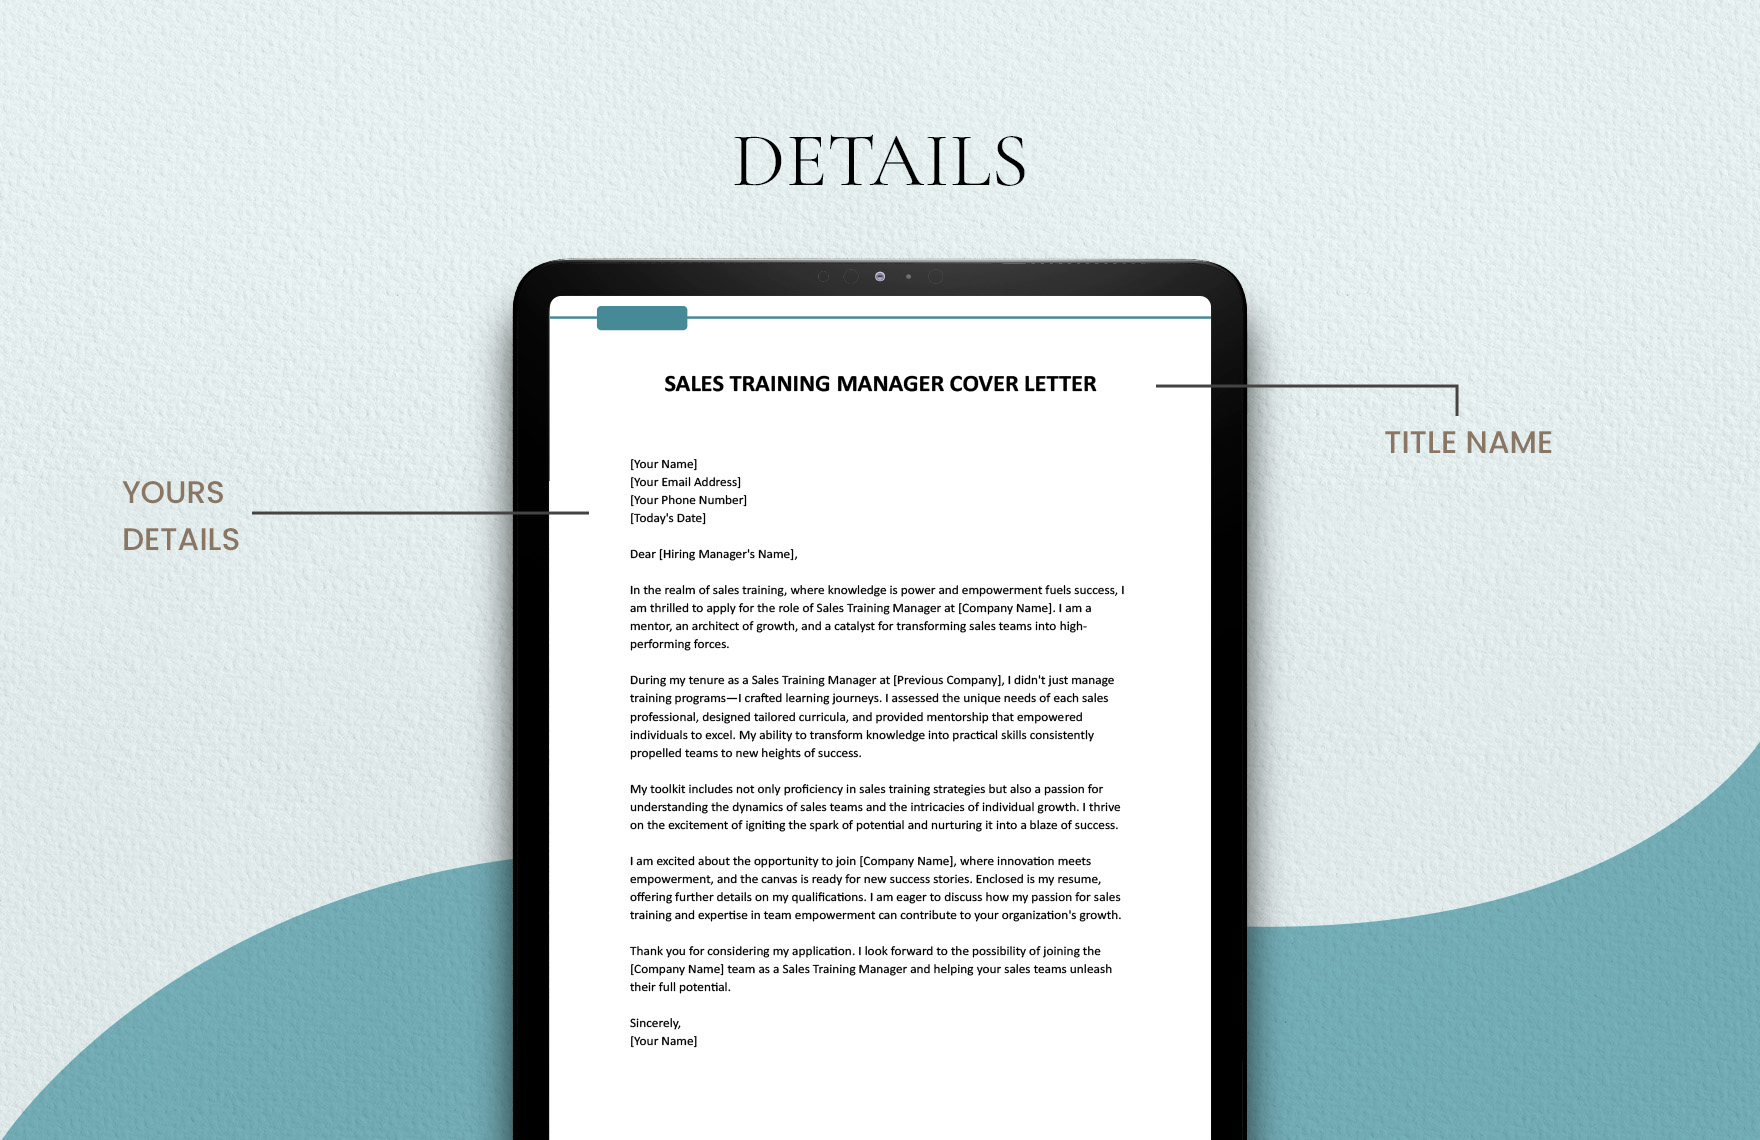 Sales Training Manager Cover Letter